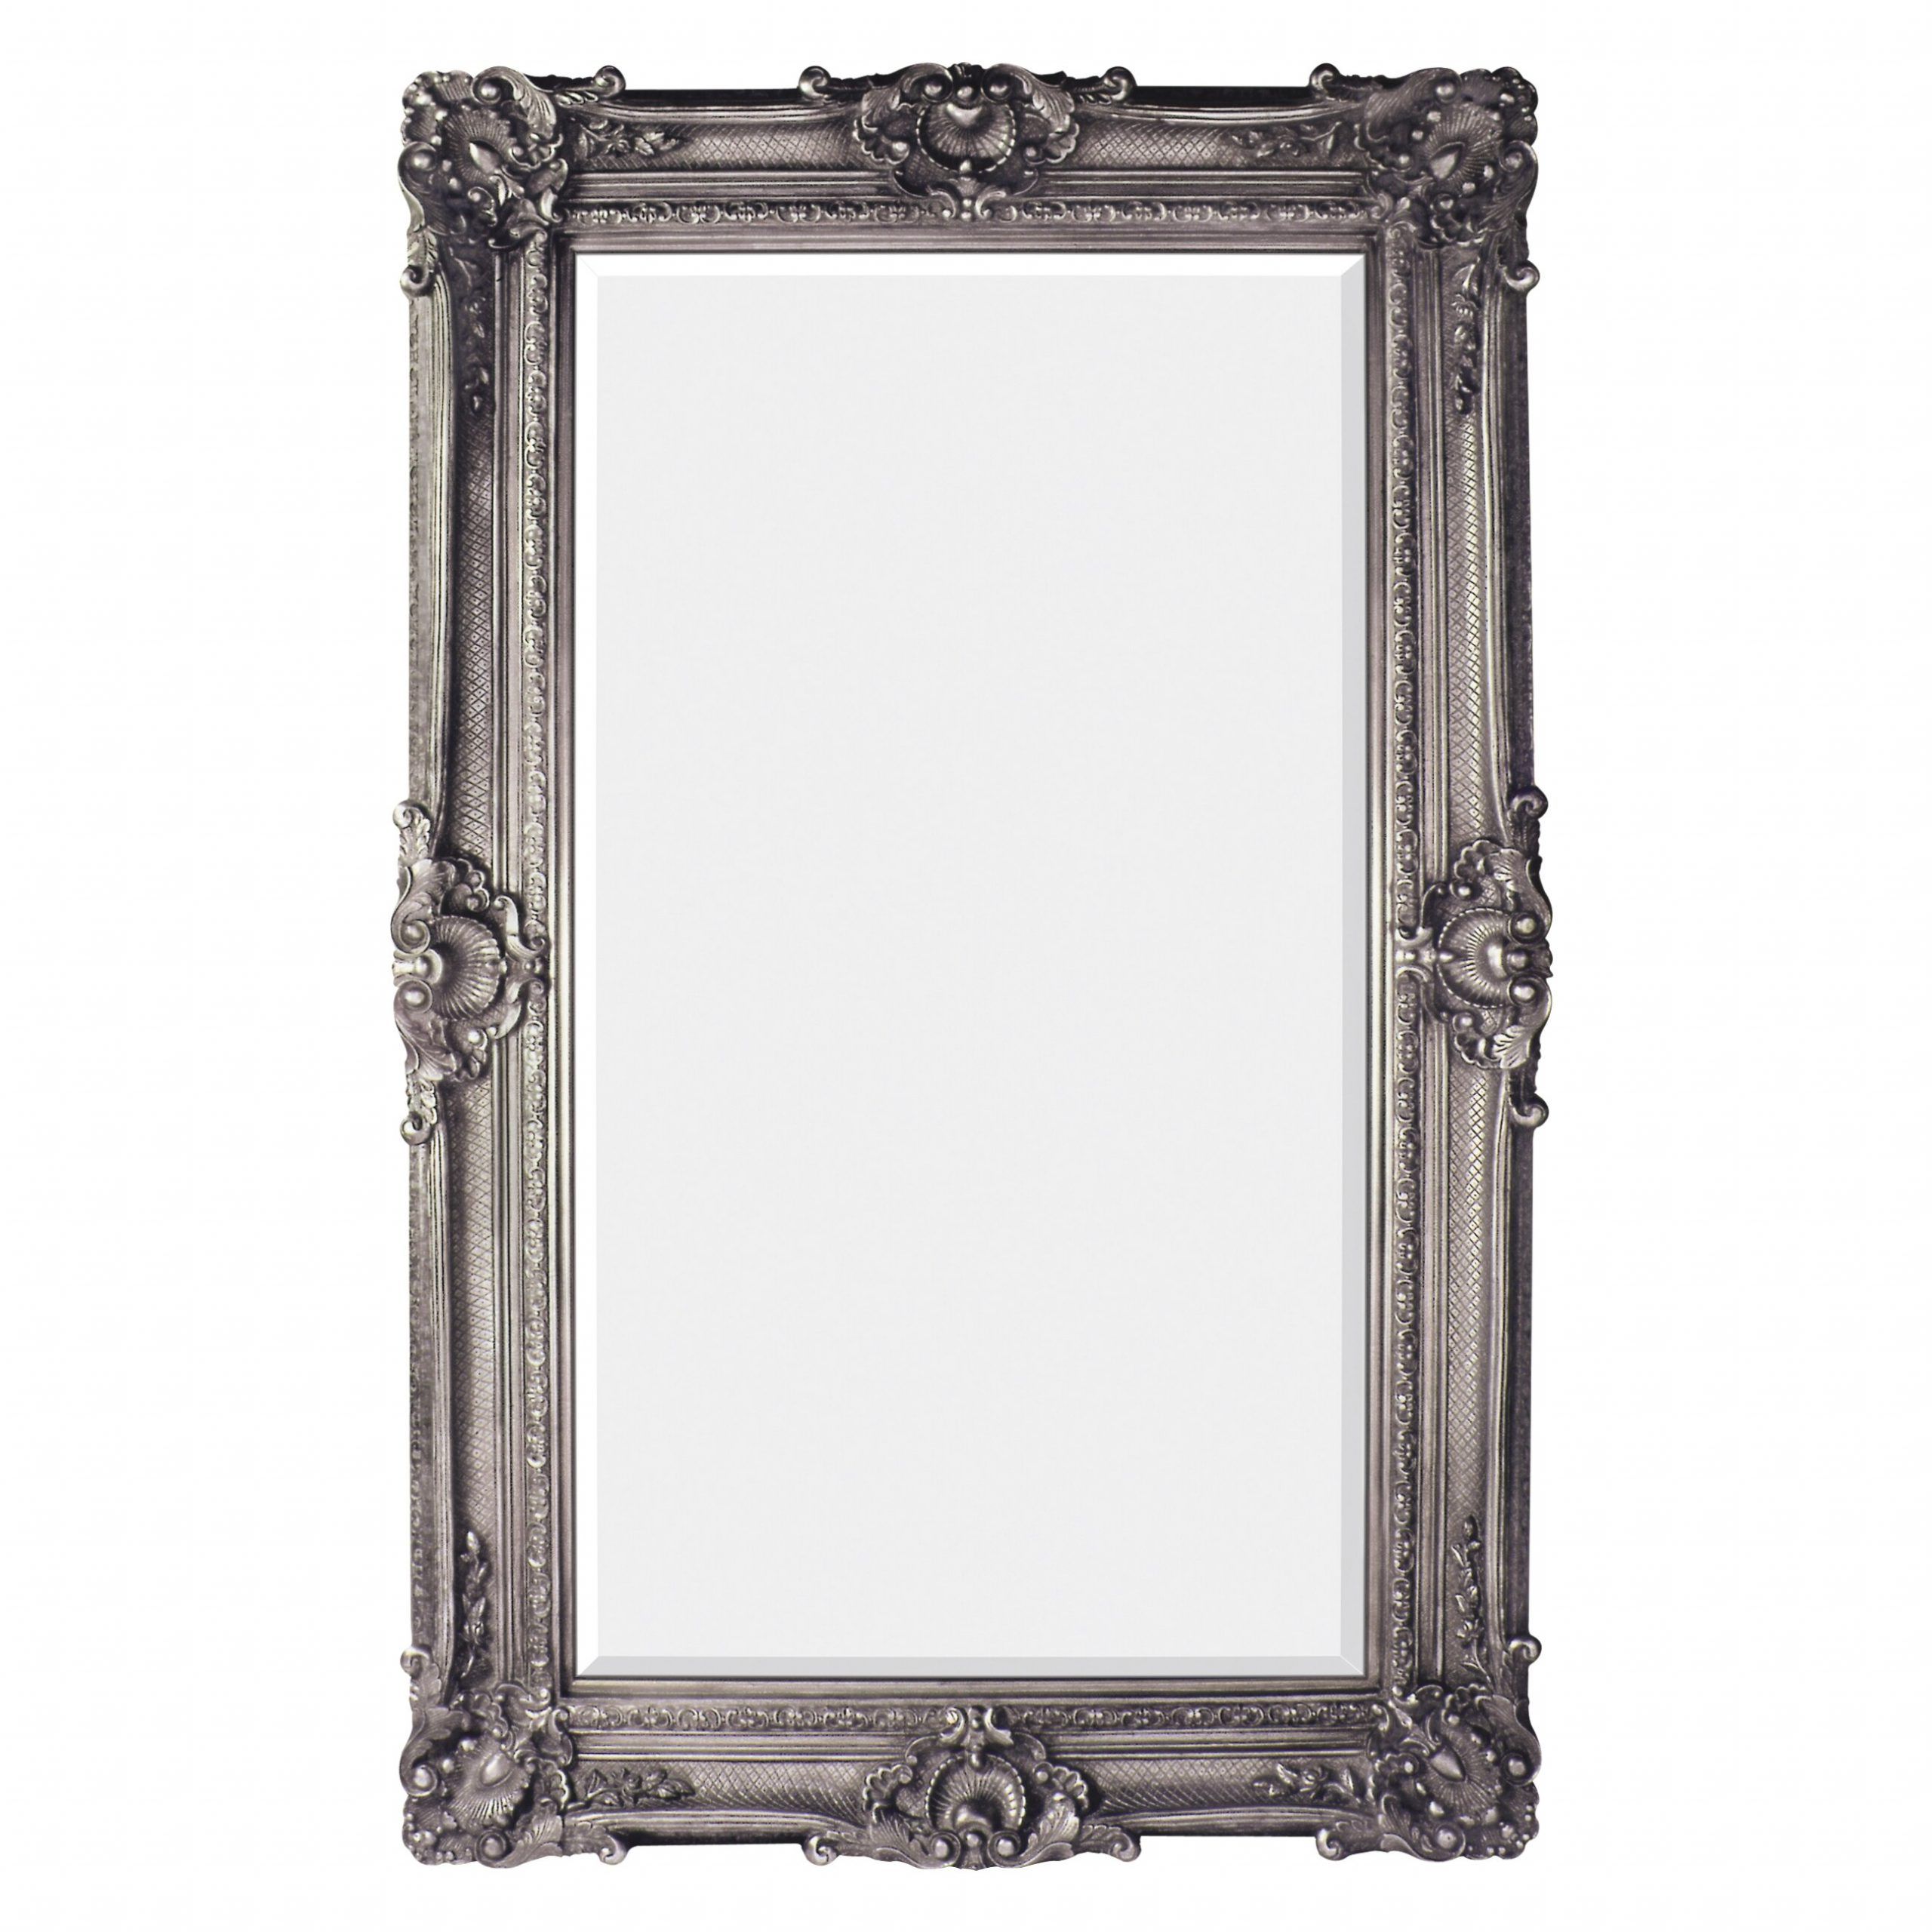 Majestic Mirror Antique Silver Leaf Finish Traditional Framed Beveled Intended For Traditional Beveled Wall Mirrors (View 9 of 15)